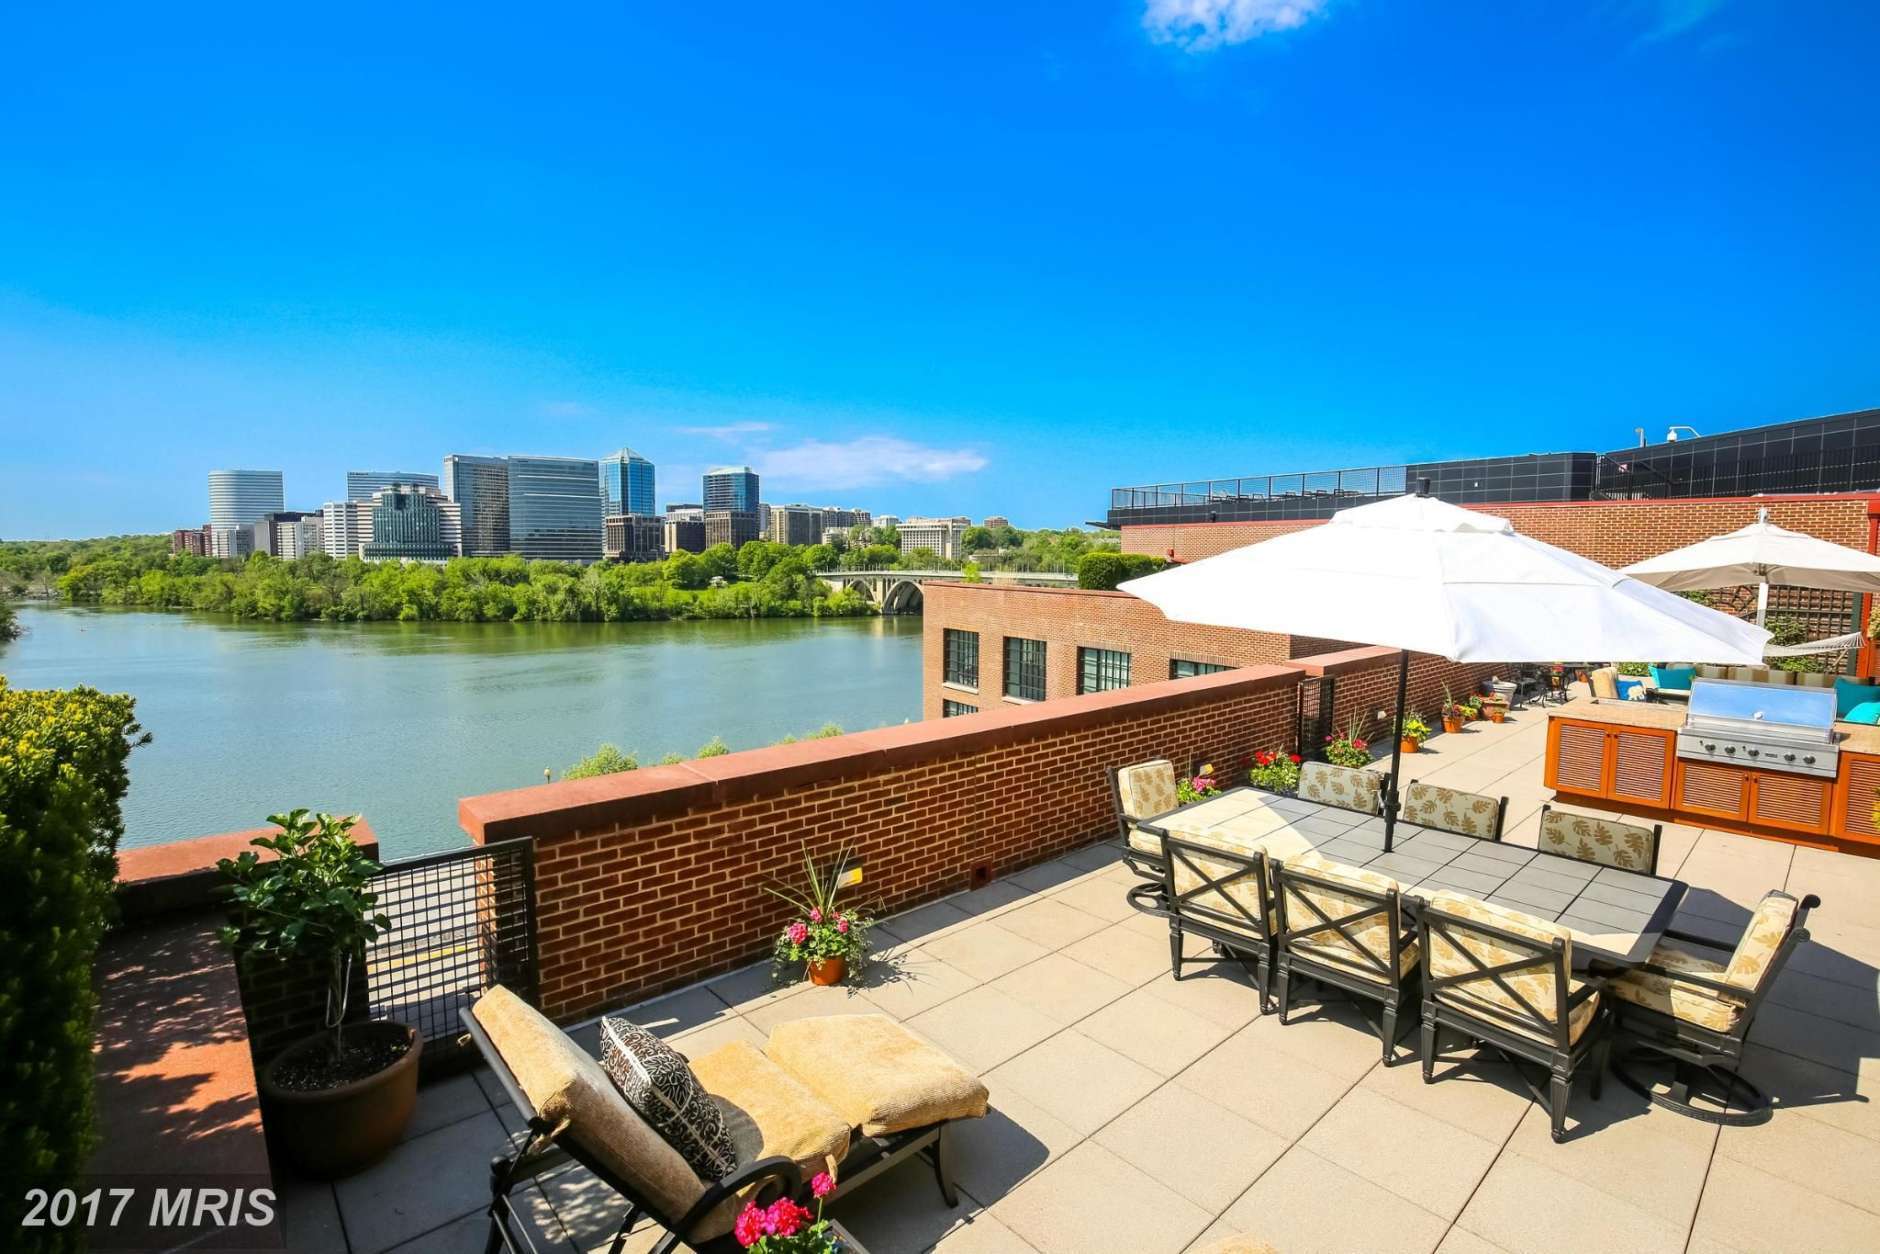 2. $4,825,000
3303 Water Street NW, Unit 8H
Washington, DC
This 2004 apartment has three bedrooms and three full bathrooms. (Bright MLS)